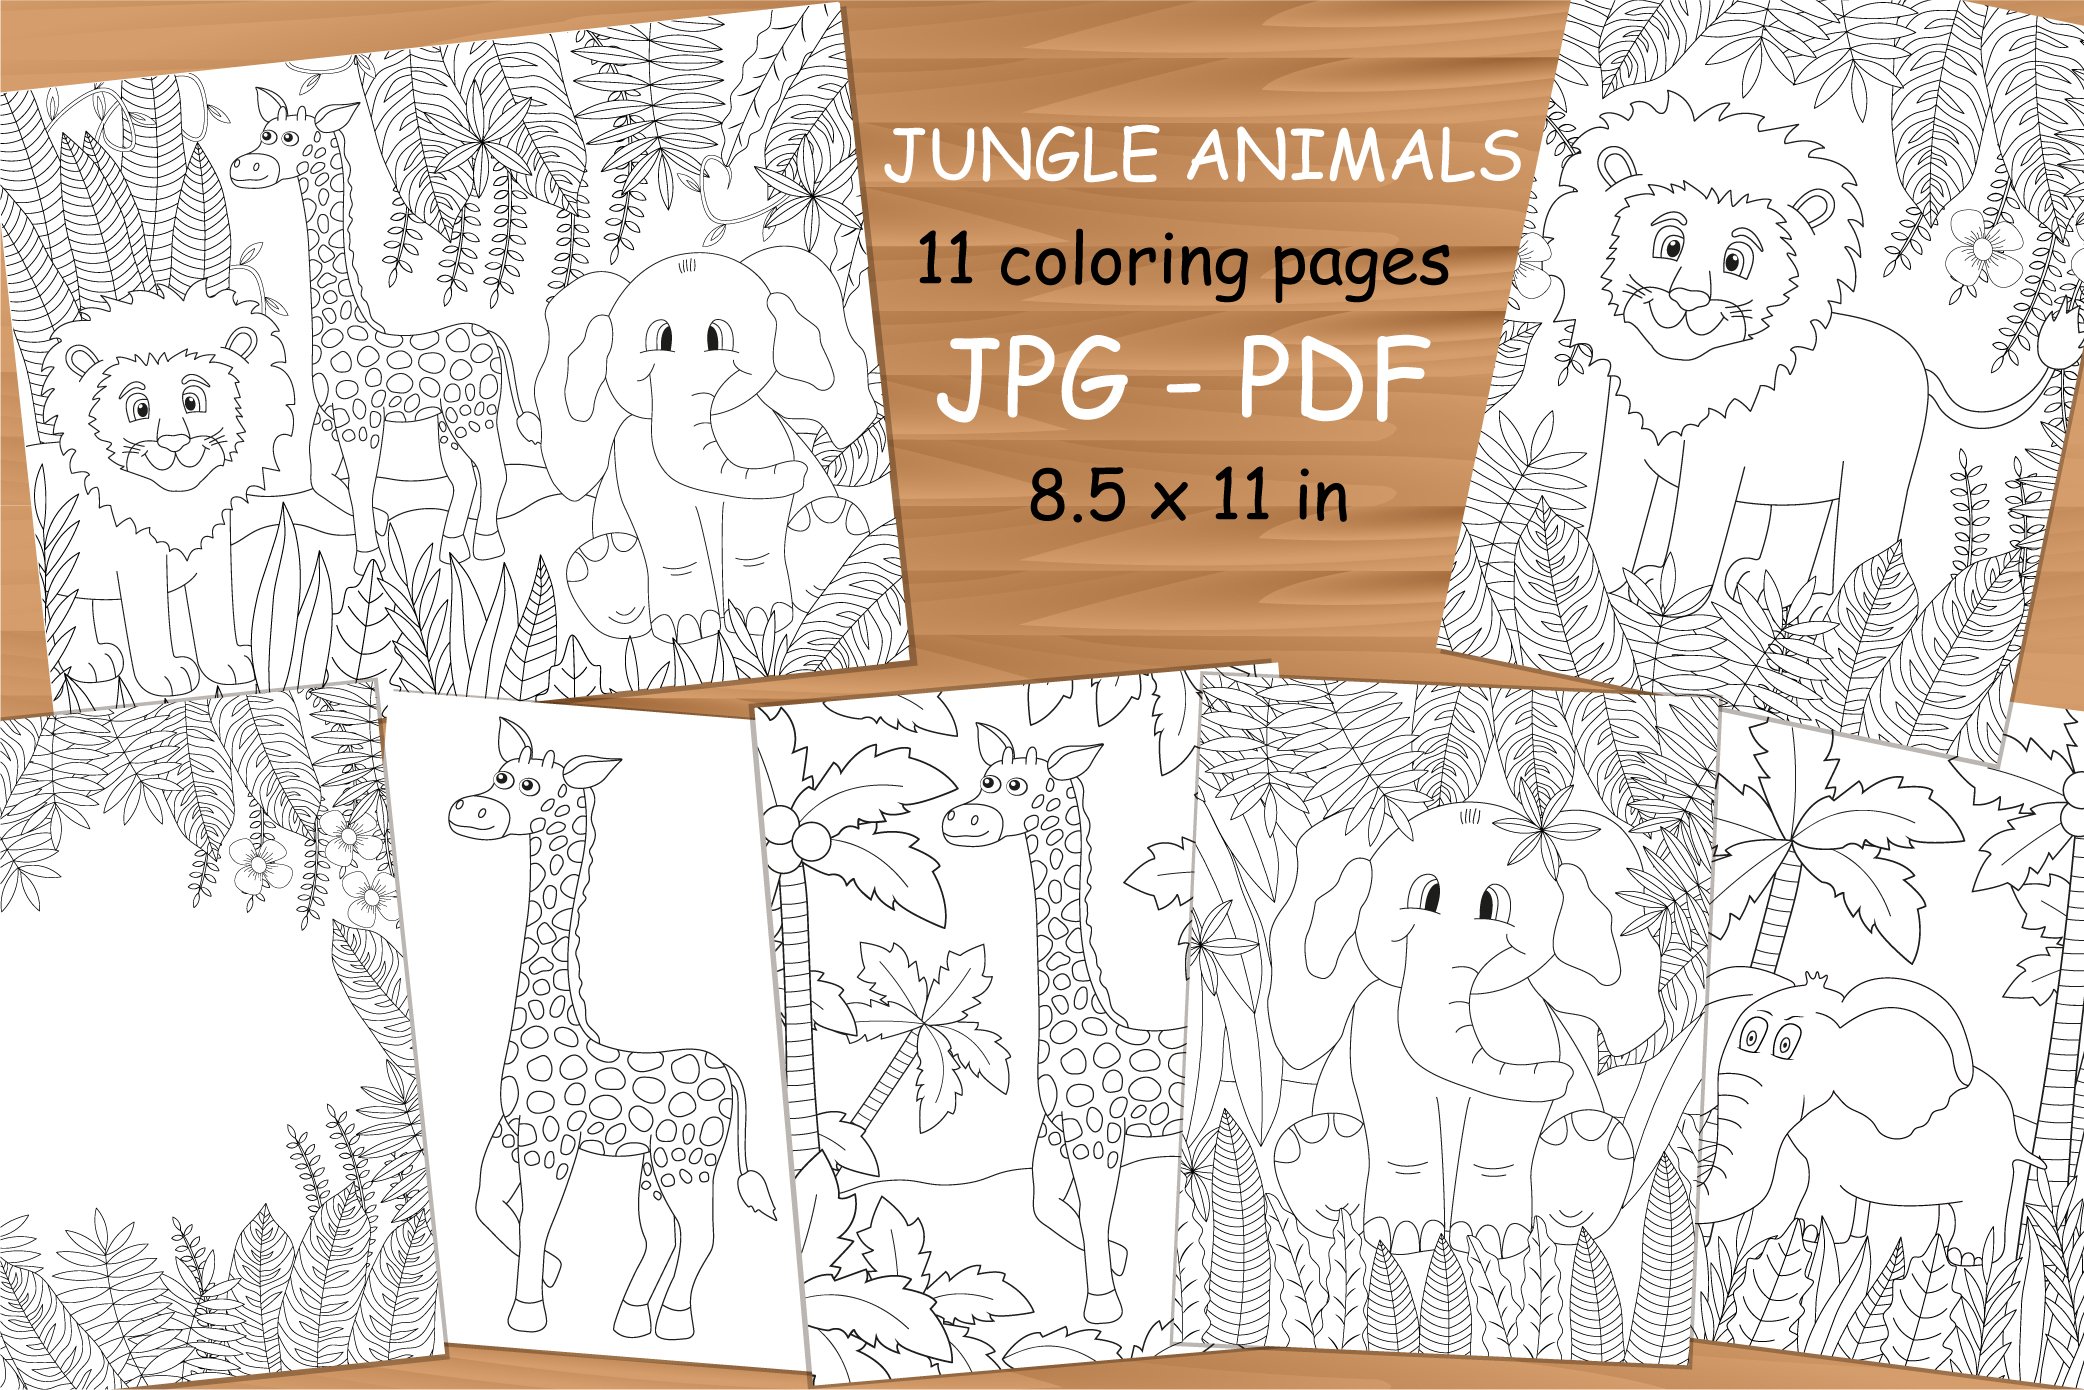 Jungle animals coloring pages